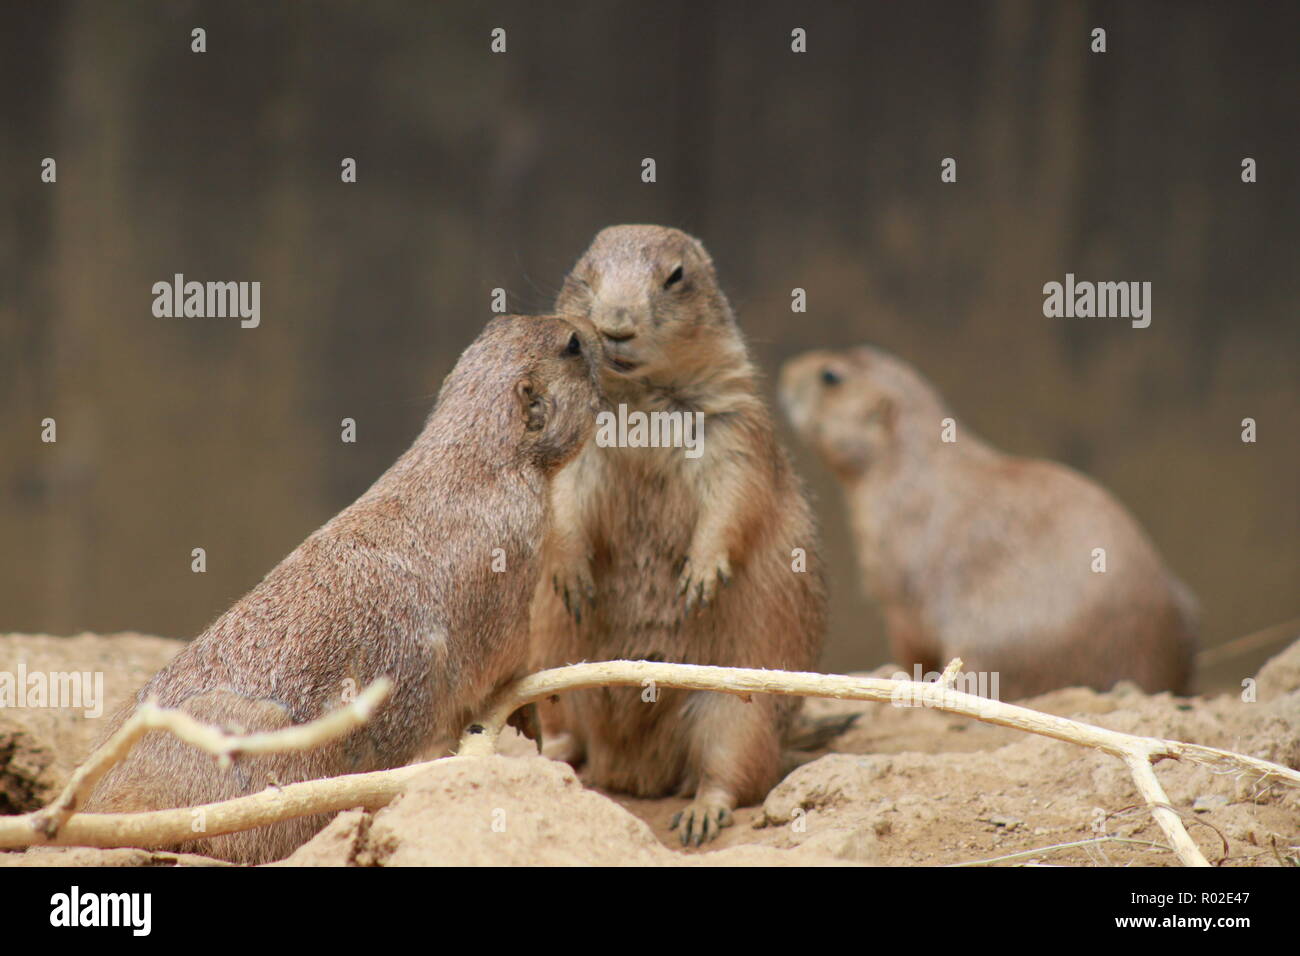 Prairie dogs looking at each other at the Smithsonian National Zoo, Washington, DC Stock Photo